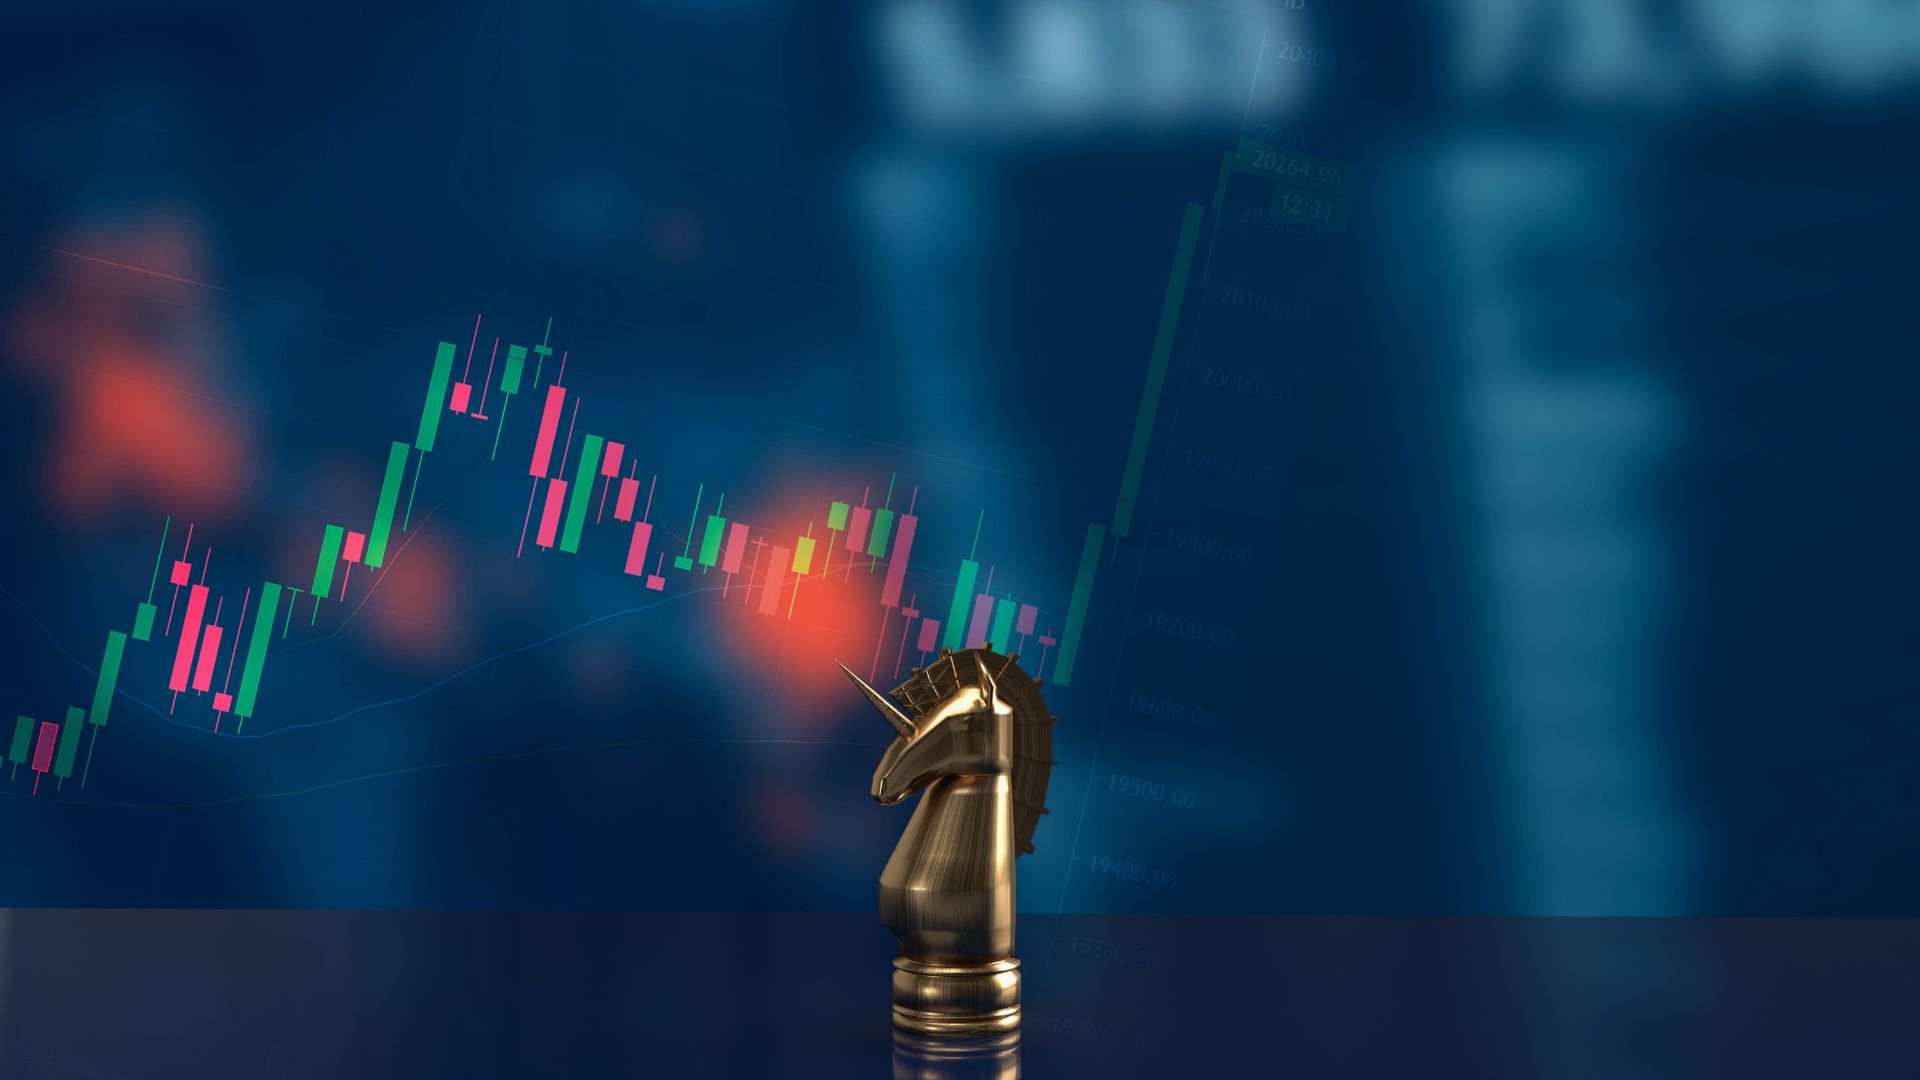 Chess piece and stock exchange image